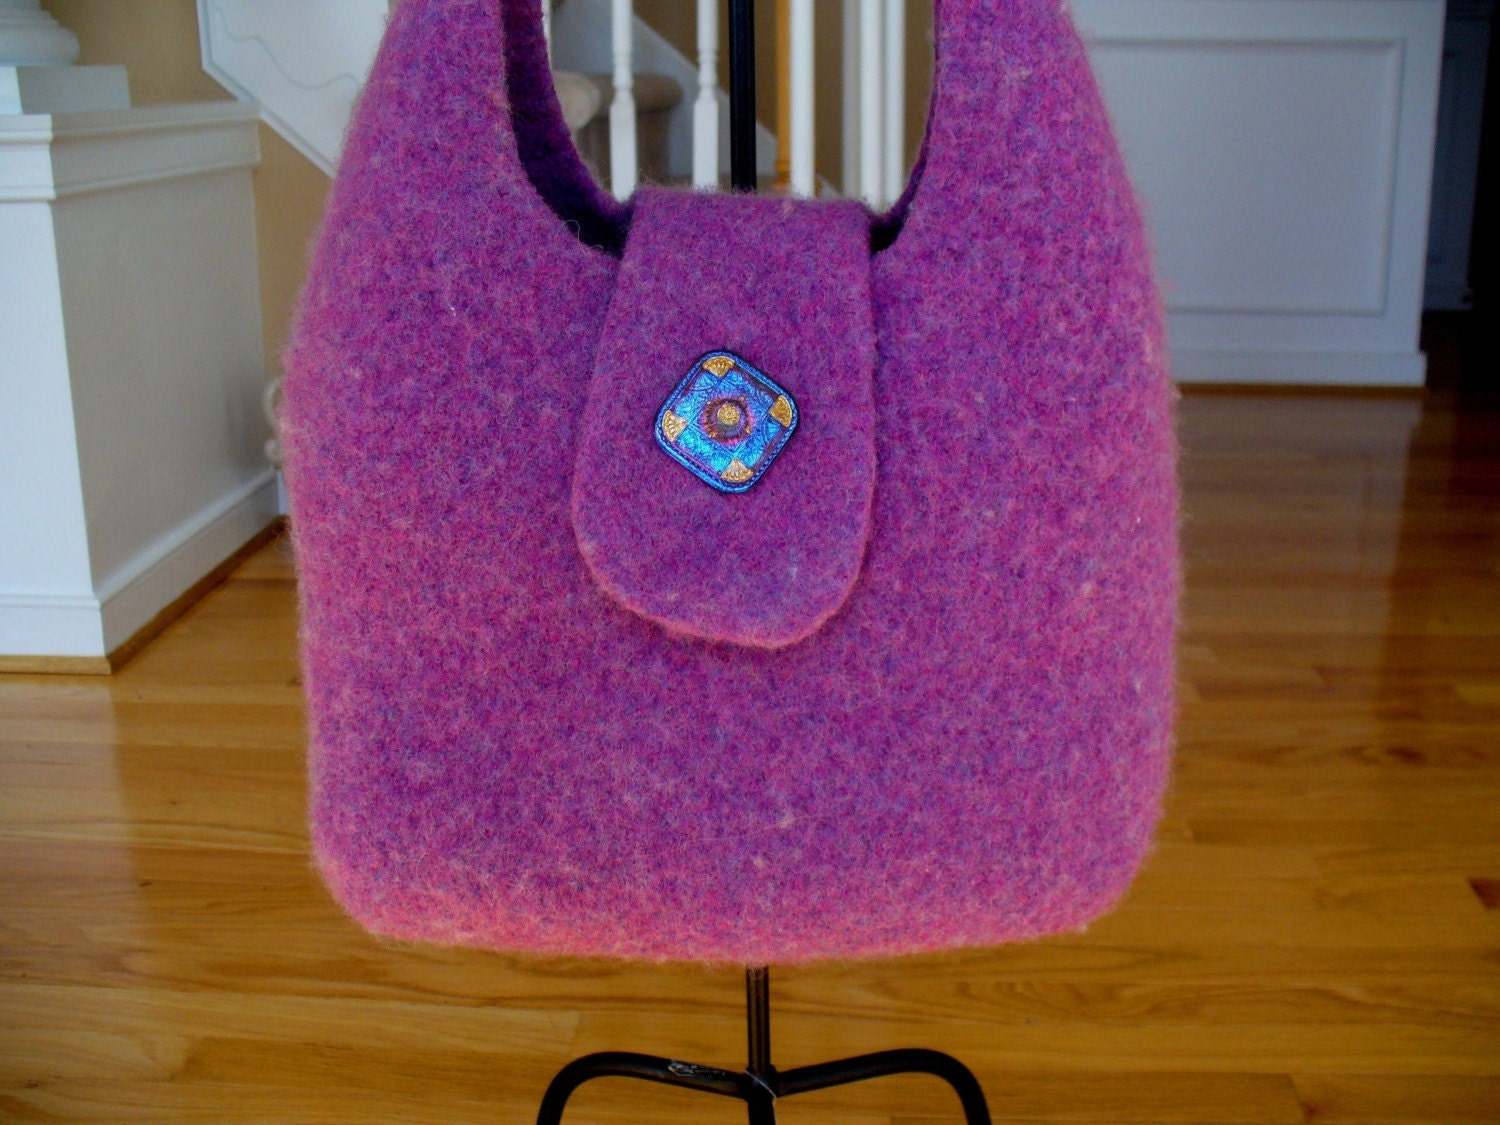 Felted Bags And Purses Knitting Patterns - Knitting Patterns For